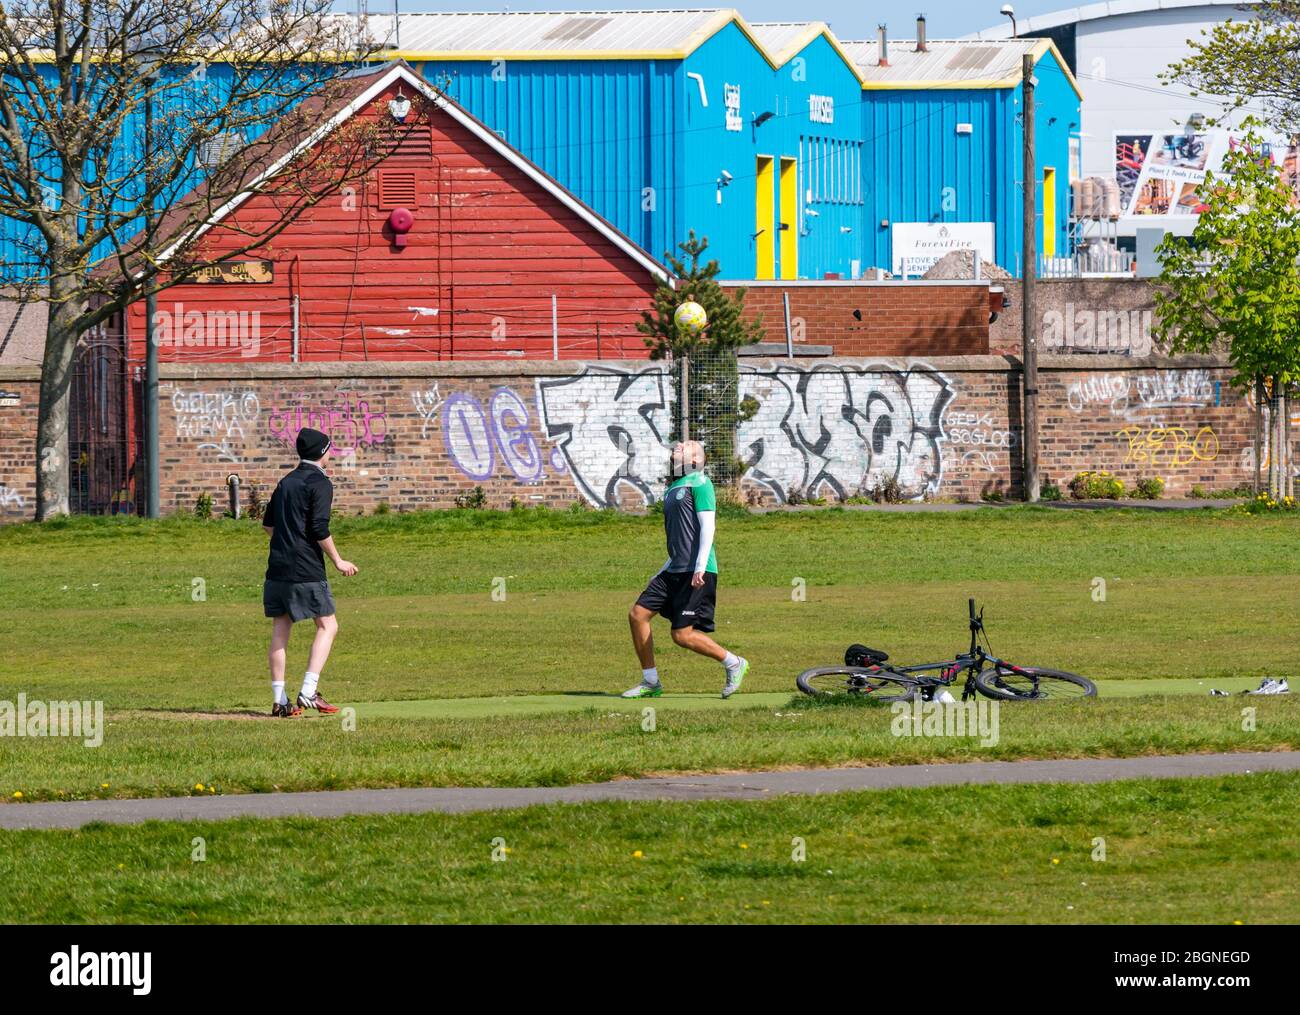 Leith, Edinburgh, Scotland, United Kingdom. 22nd April 2020. Covid-19 Lockdown: people exercise on Leith Links in Spring sunshine. Two men kick a football back and forth between each other in their daily exercise during the Coronavirus pandemic Stock Photo